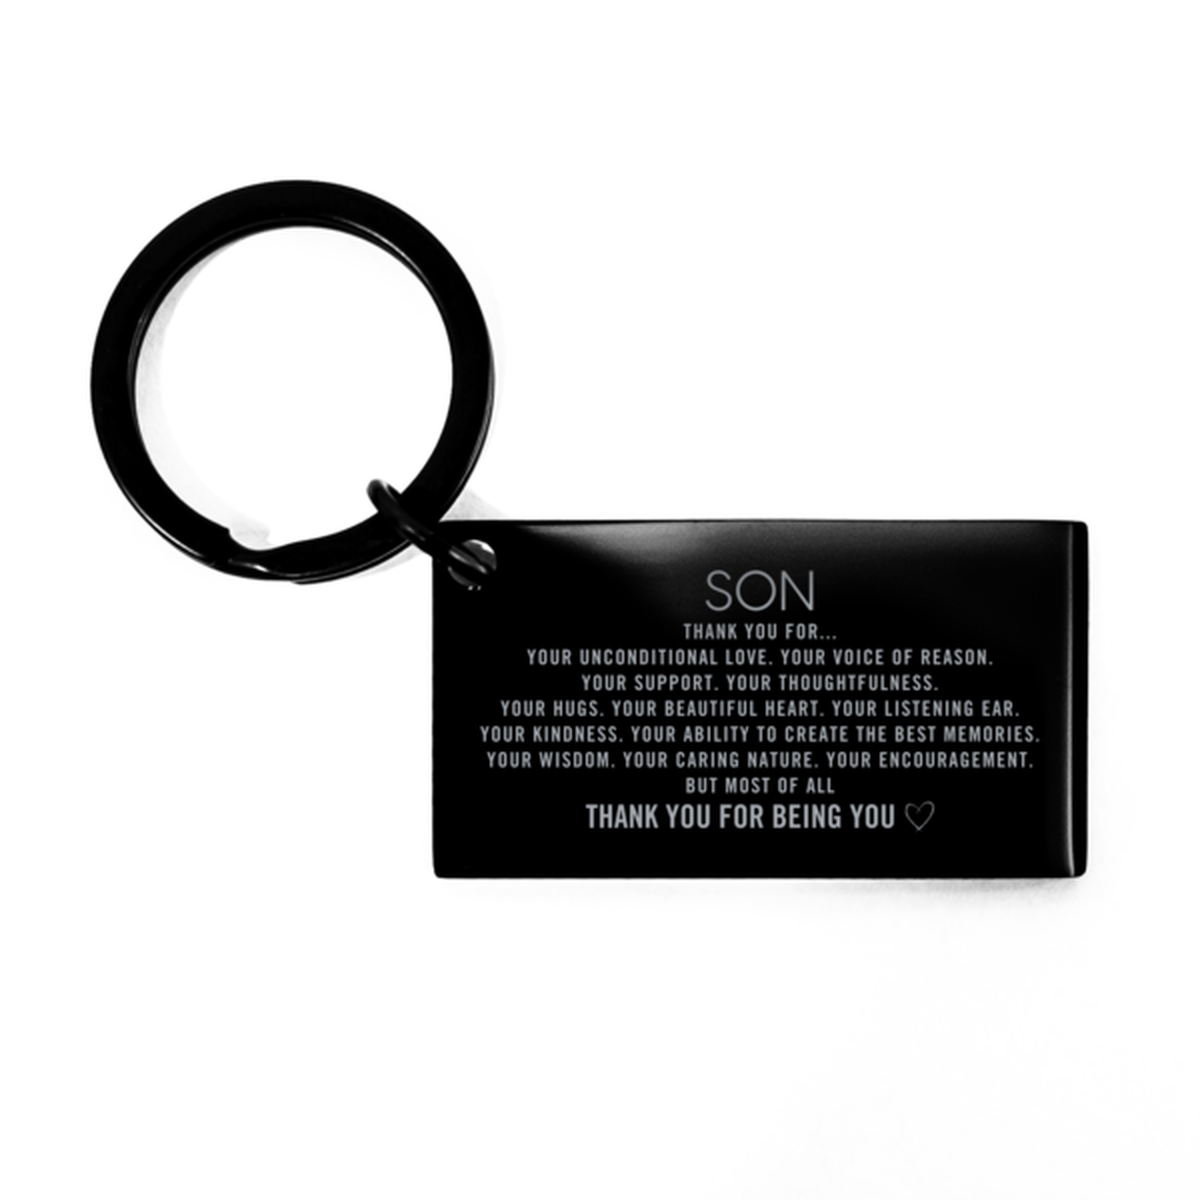 Son Keychain Custom, Engraved Gifts For Son Christmas Graduation Birthday Gifts for Men Women Son Thank you for Your unconditional love